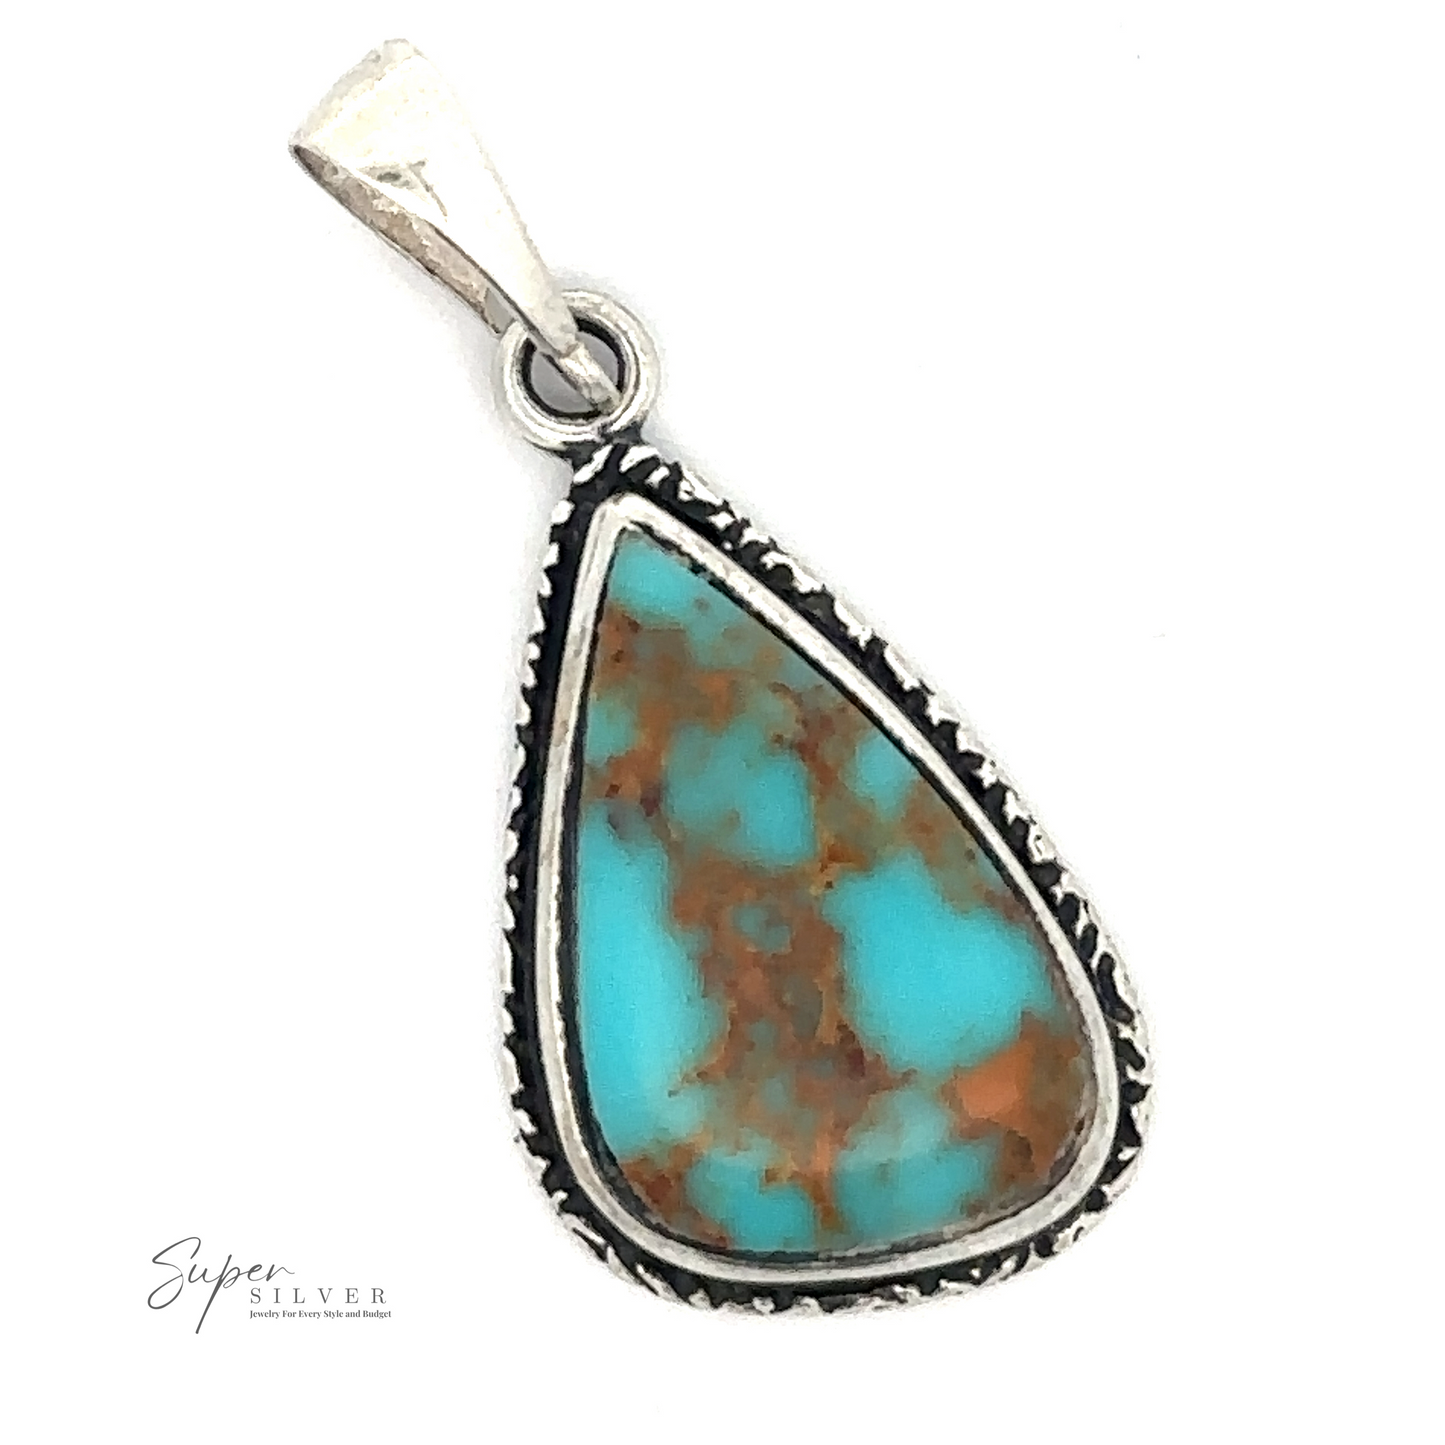 
                  
                    An Irregular Teardrop Bisbee Turquoise Pendant with Etched Border featuring a blue-green Bisbee Turquoise stone with brown veining from copper mines. The pendant includes an attached bail for a chain.
                  
                